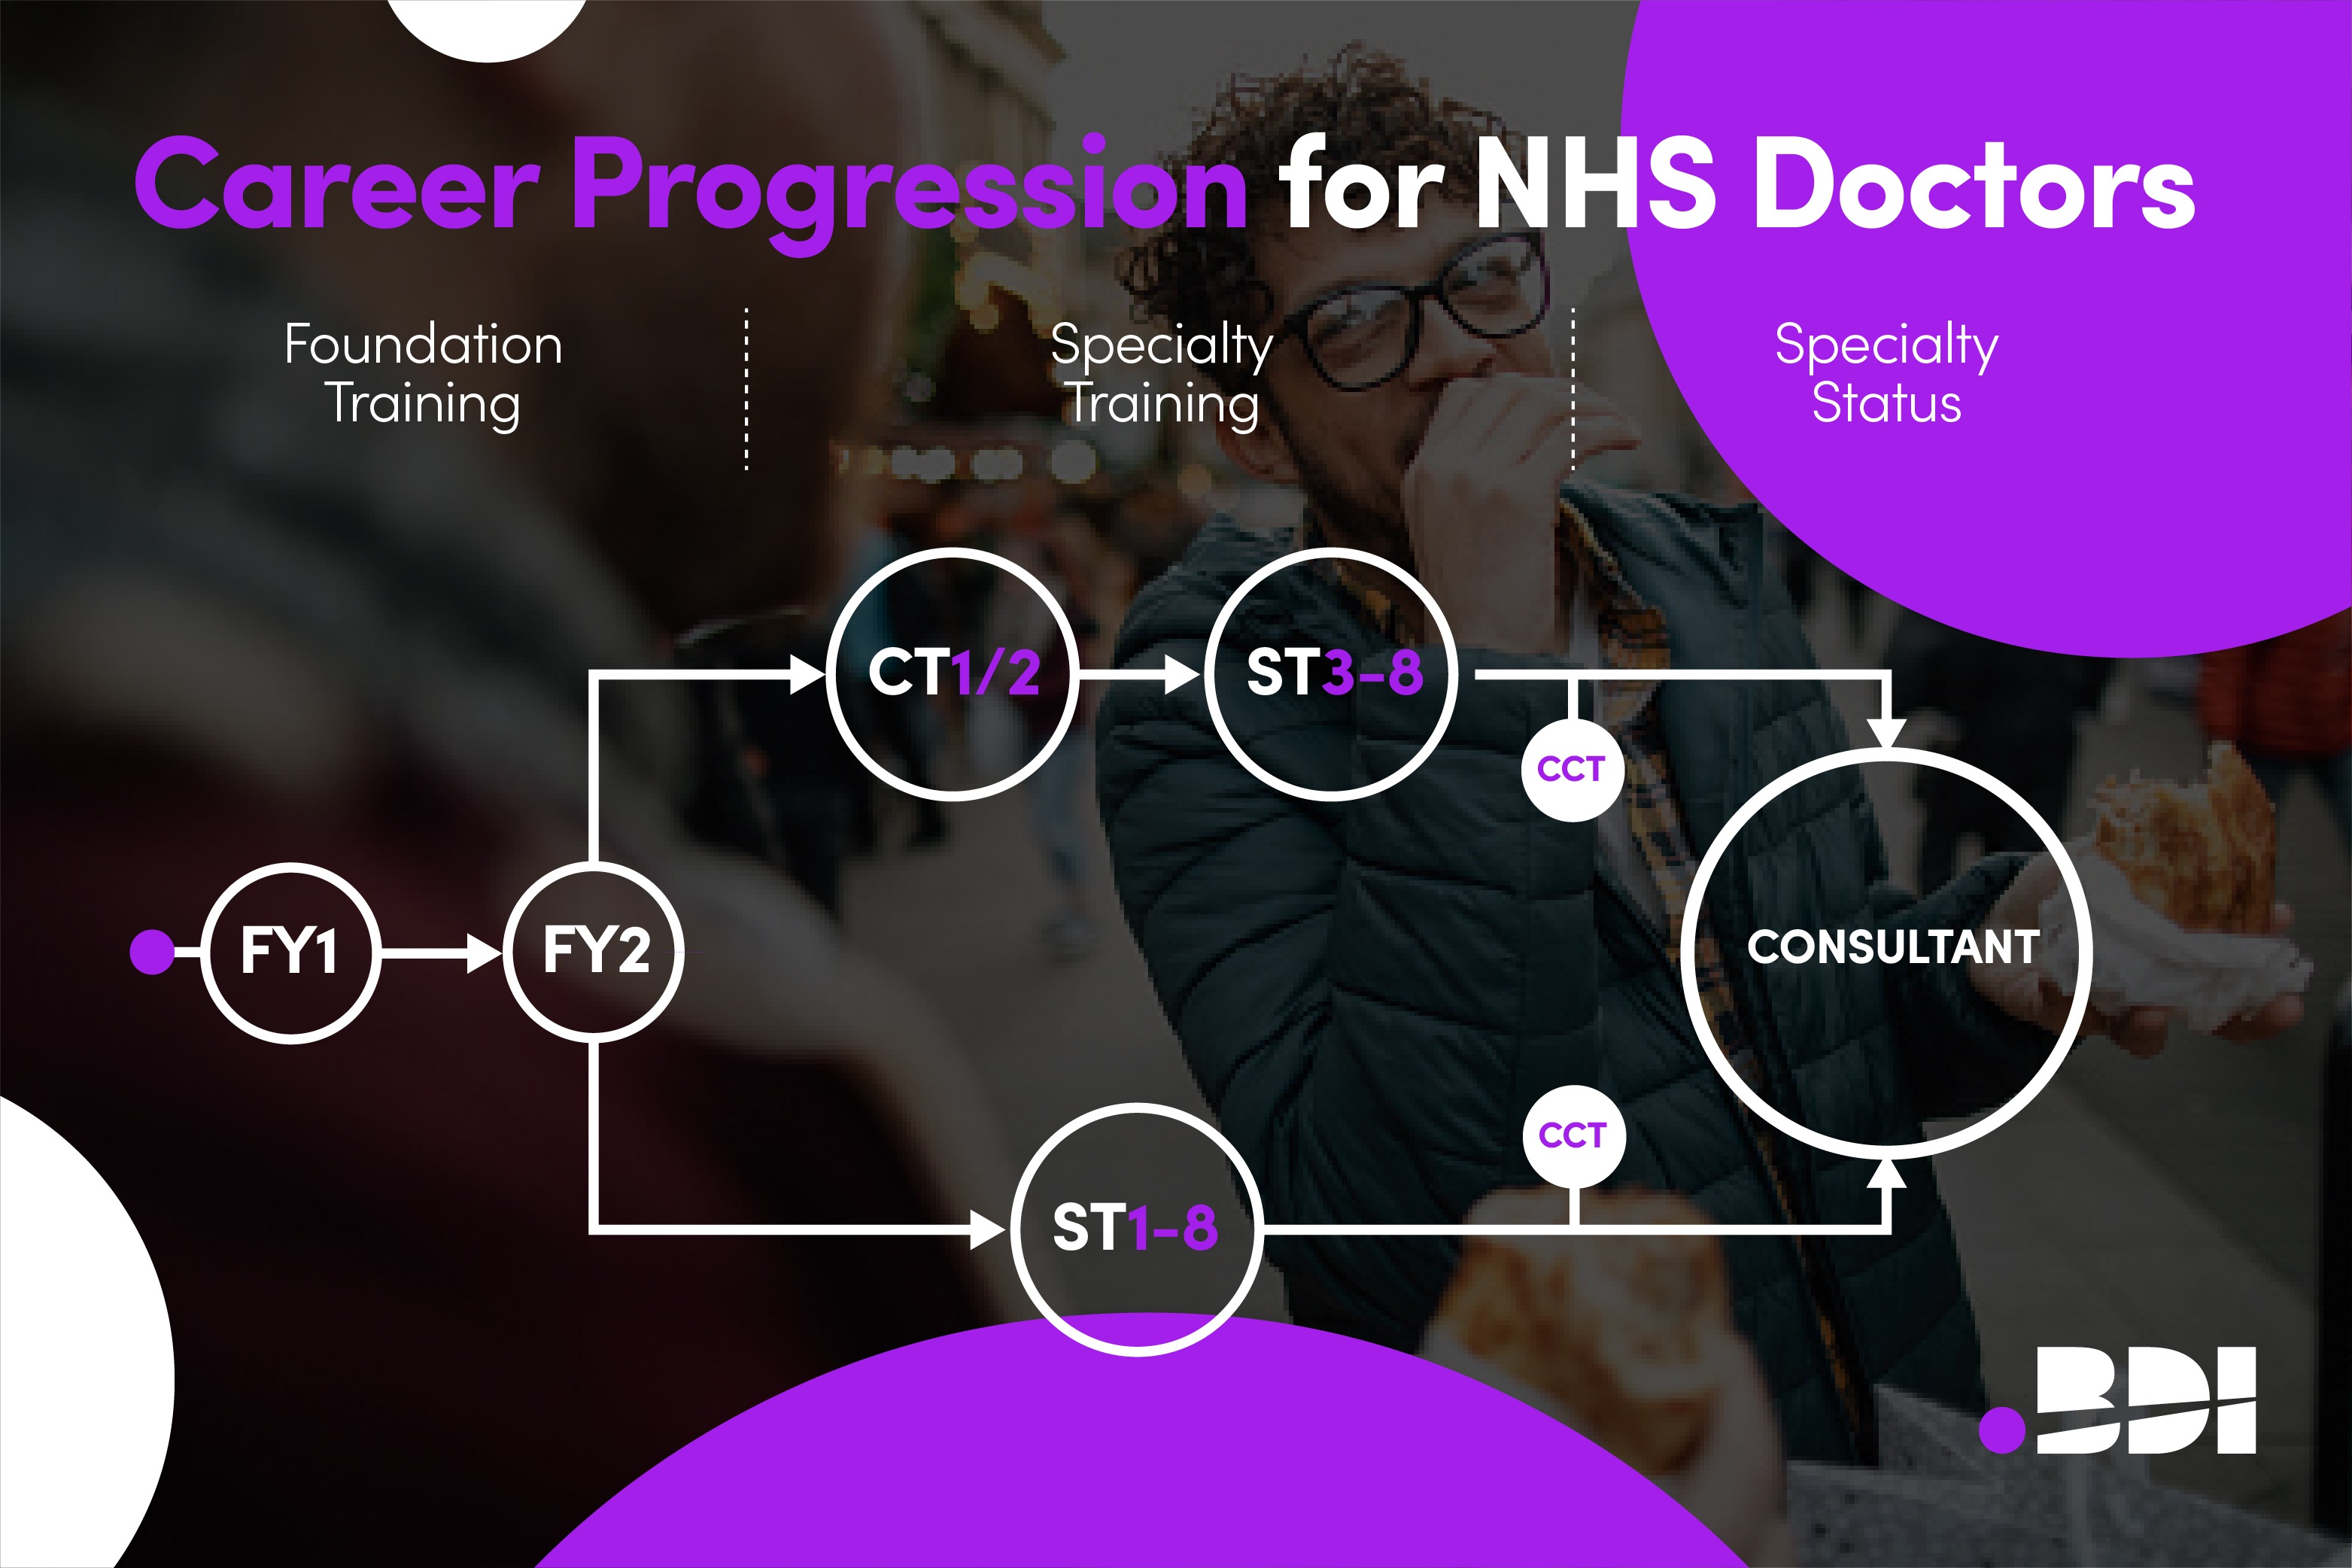 Infographic detailed the run through and uncoupled routes of oncology training in the NHS